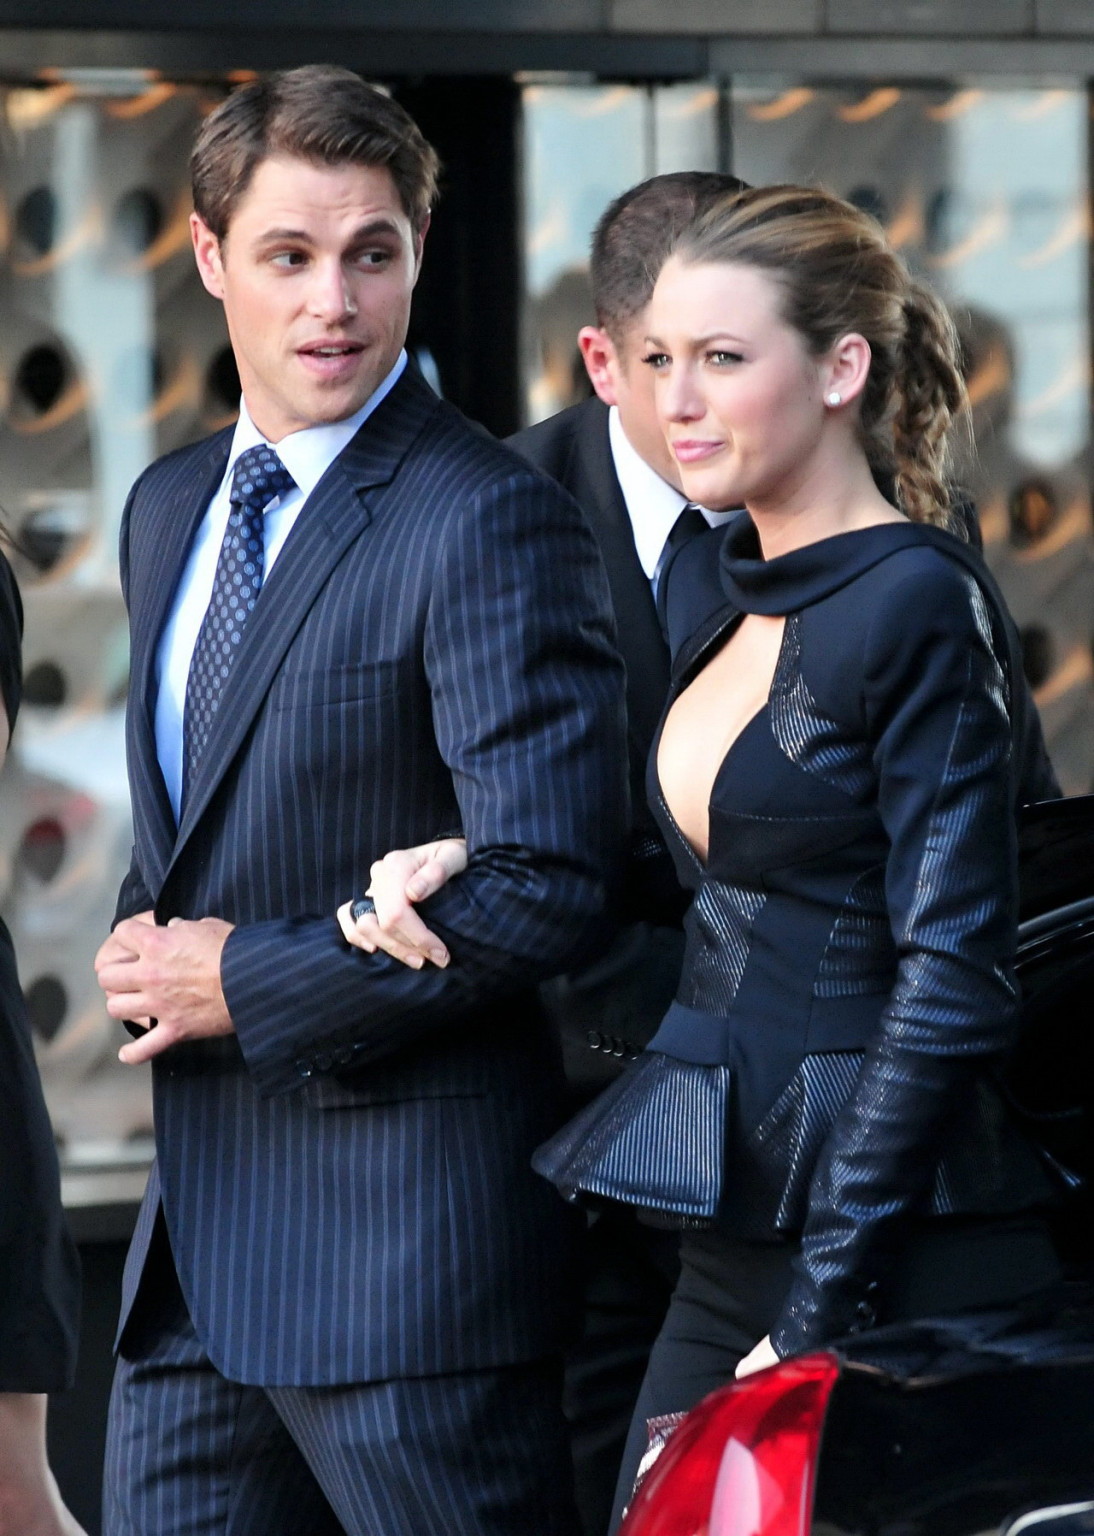 Blake Lively showing cleavage in killer outfit on the 'Gossip Girl' set in NYC #75334729